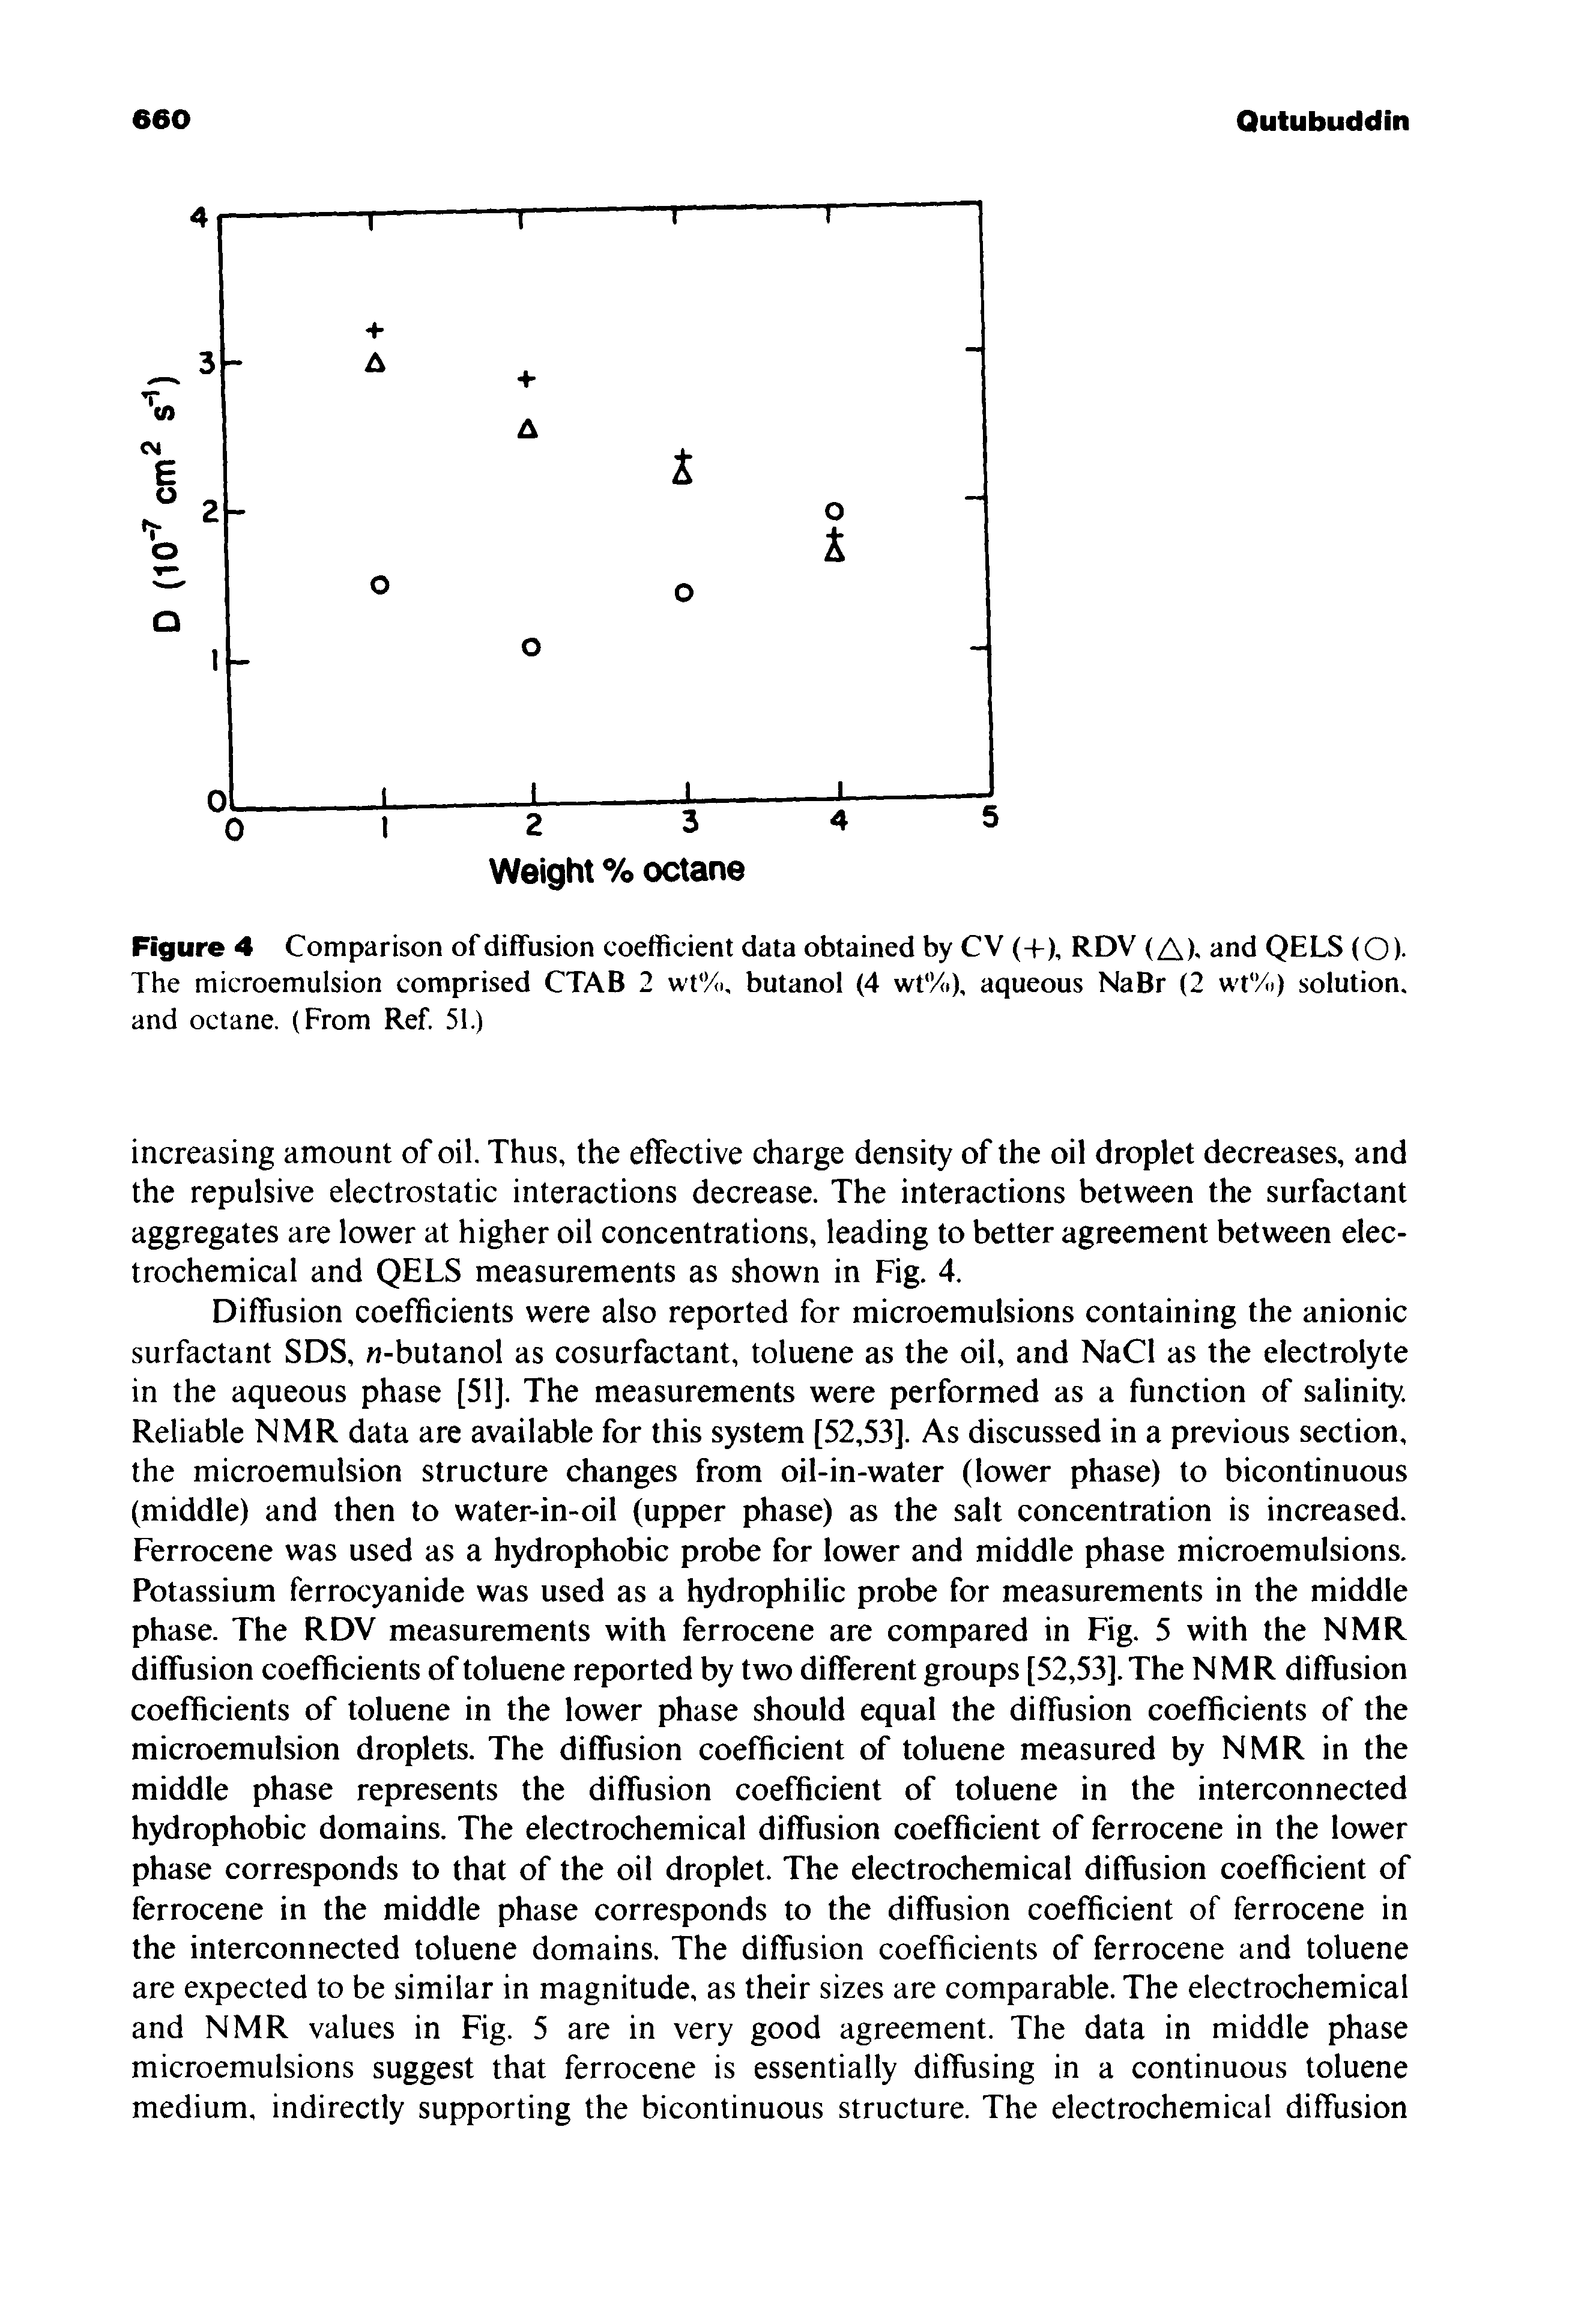 Figure 4 Comparison of diffusion coefficient data obtained by CV (+), RDV (Af and QELS (O)-The microemulsion comprised CTAB 2 wt Mi, butanol (4 wt Mi), aqueous NaBr (2 wt%) solution, and octane. (From Ref. 51.)...